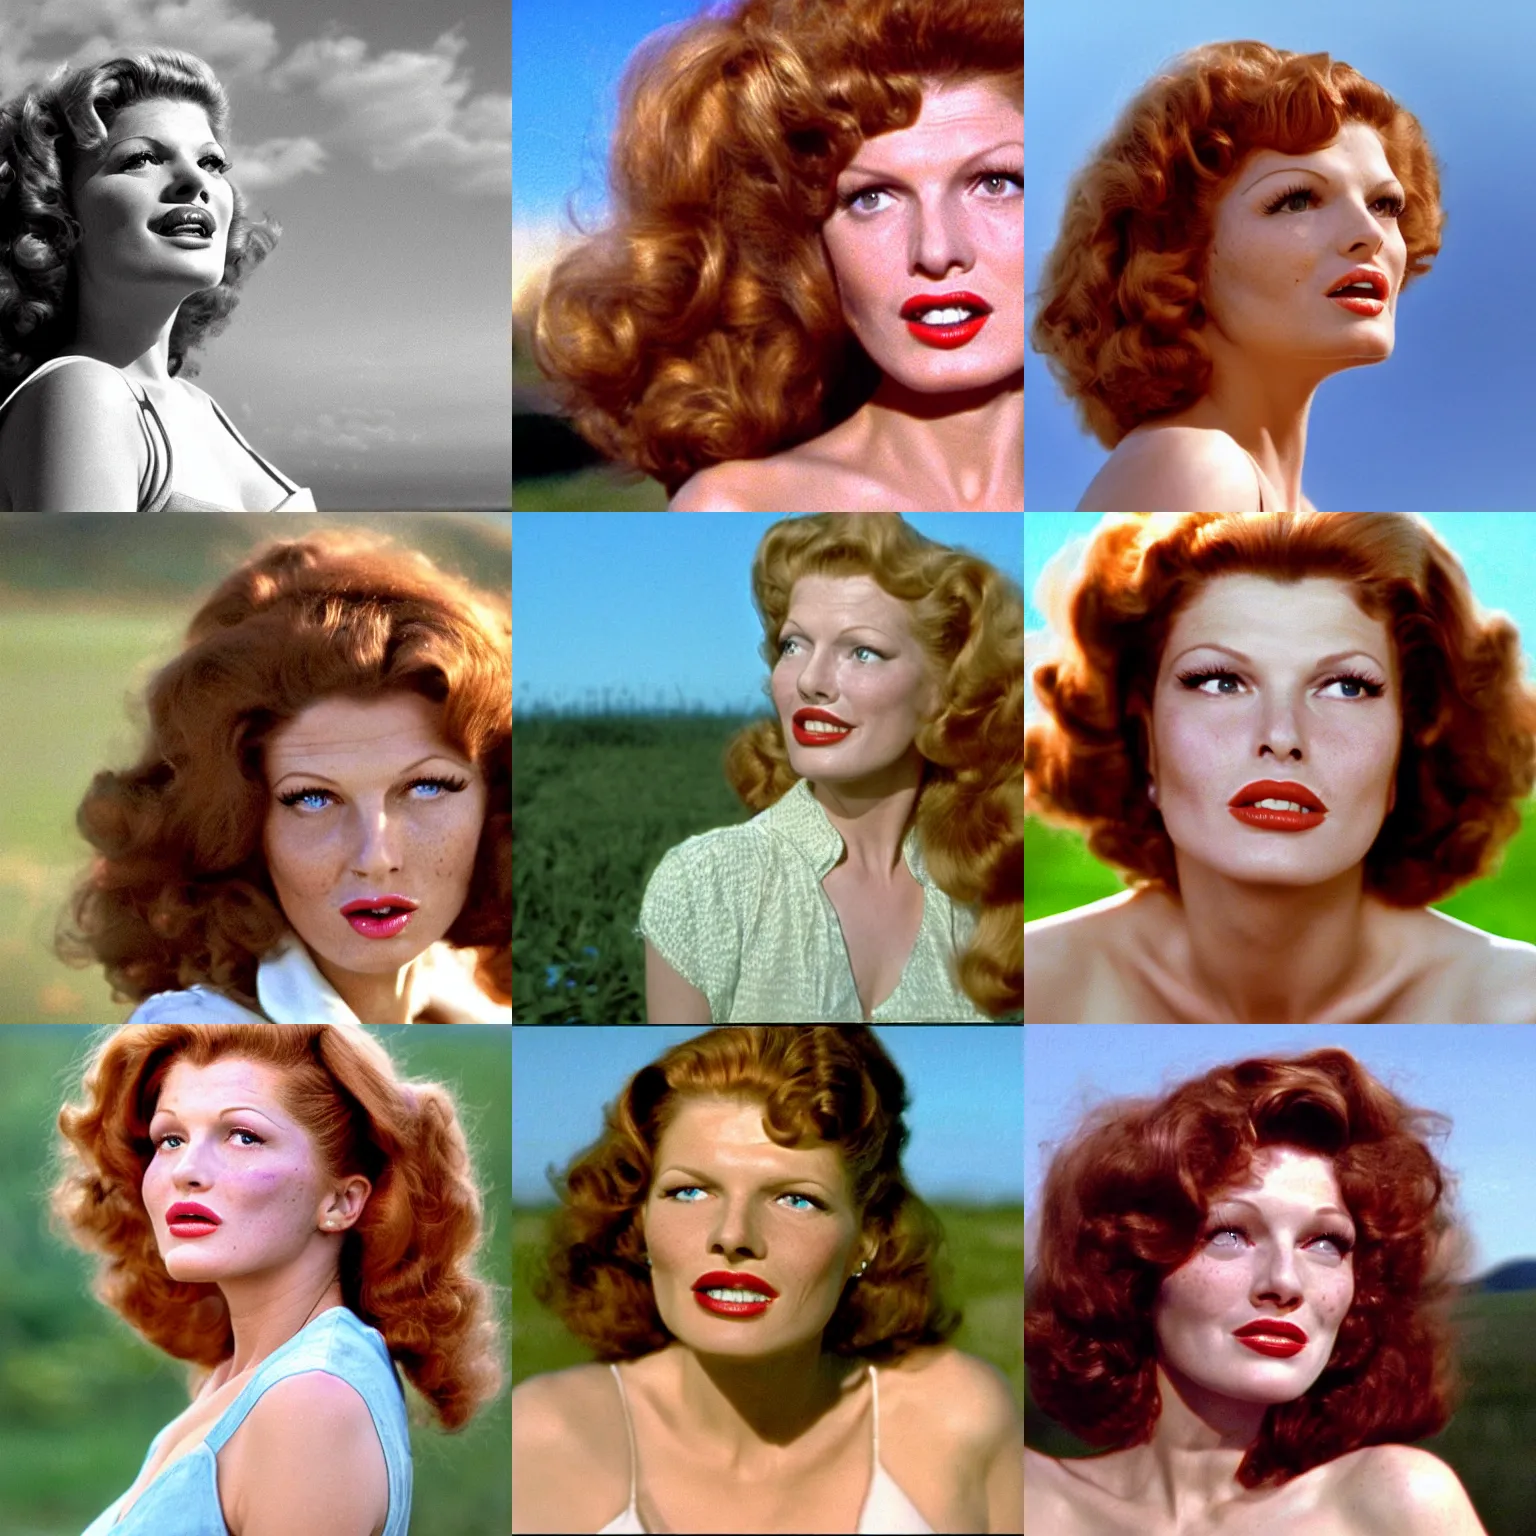 Prompt: natural 8 k shot from a 2 0 0 5 romantic comedy by sam mendes of rita hayworth with natural face, freckles, natural skin, beauty spots and very small lips. she stands and looks on the horizon with winds moving her hair. fuzzy blue sky in the background. small details, natural lighting, 2 4 mm lenses, sharp focus